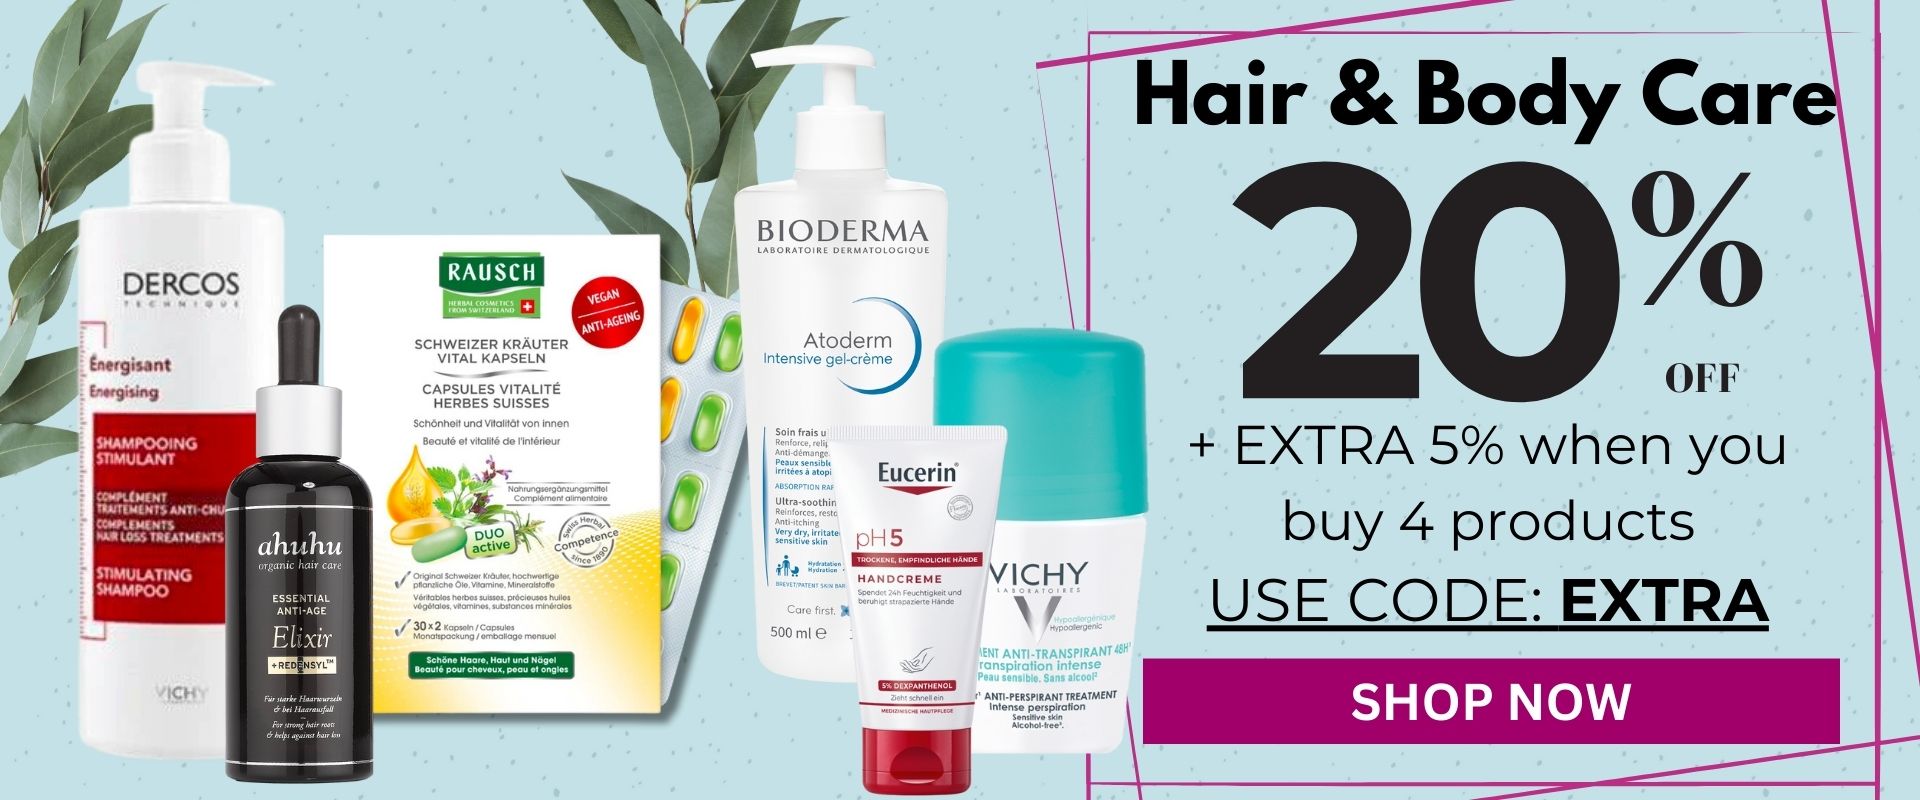 20% off on all shampoos, conditioners, hair care, shower gels, deo, body lotions, oral care and more. Shop hair and body care now on VicNic.com